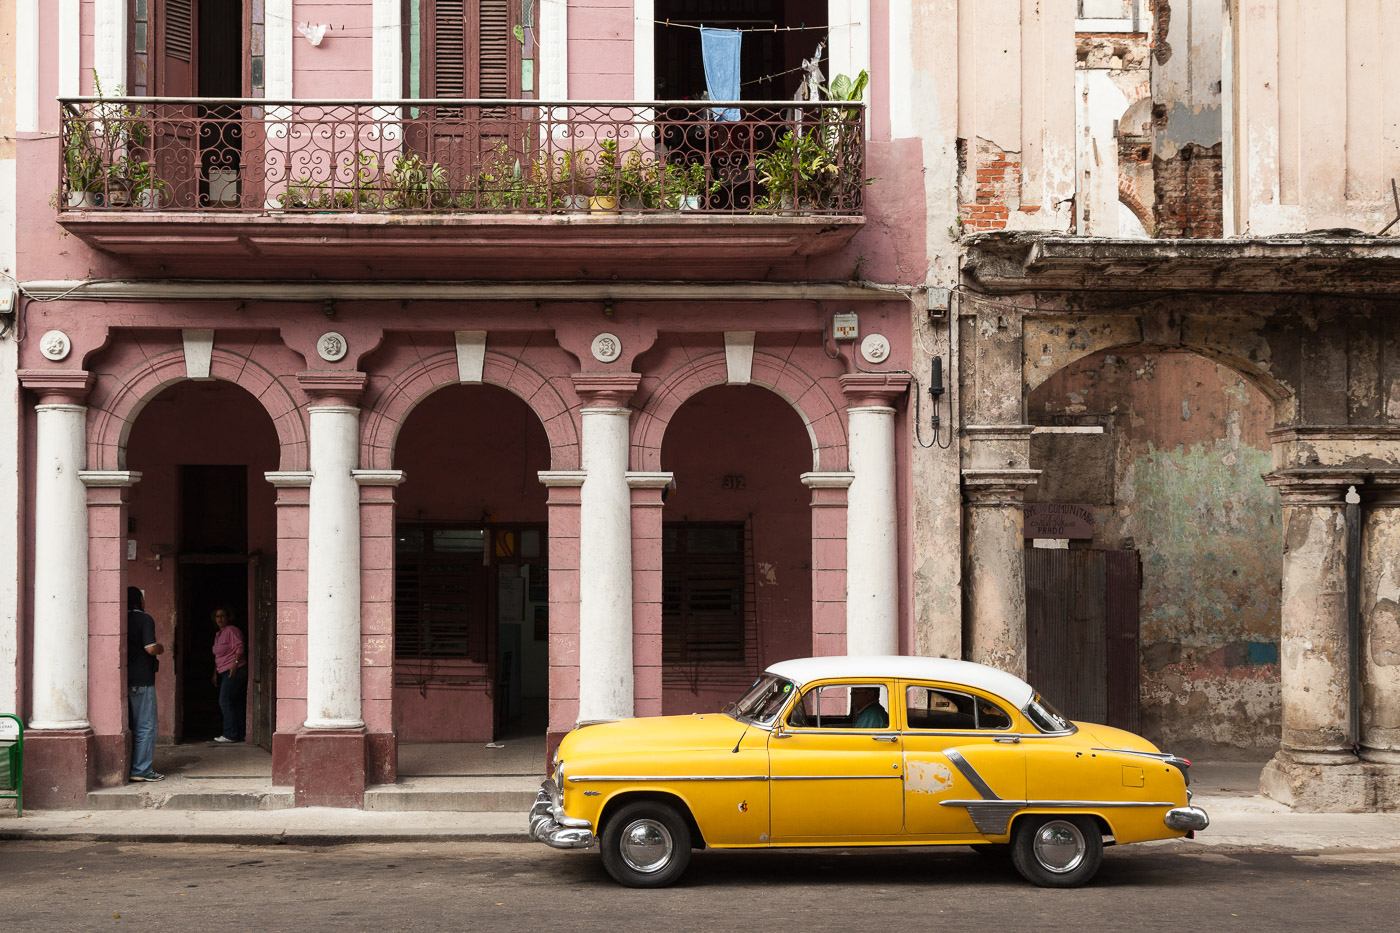 Restored Building and Old Car in Havana